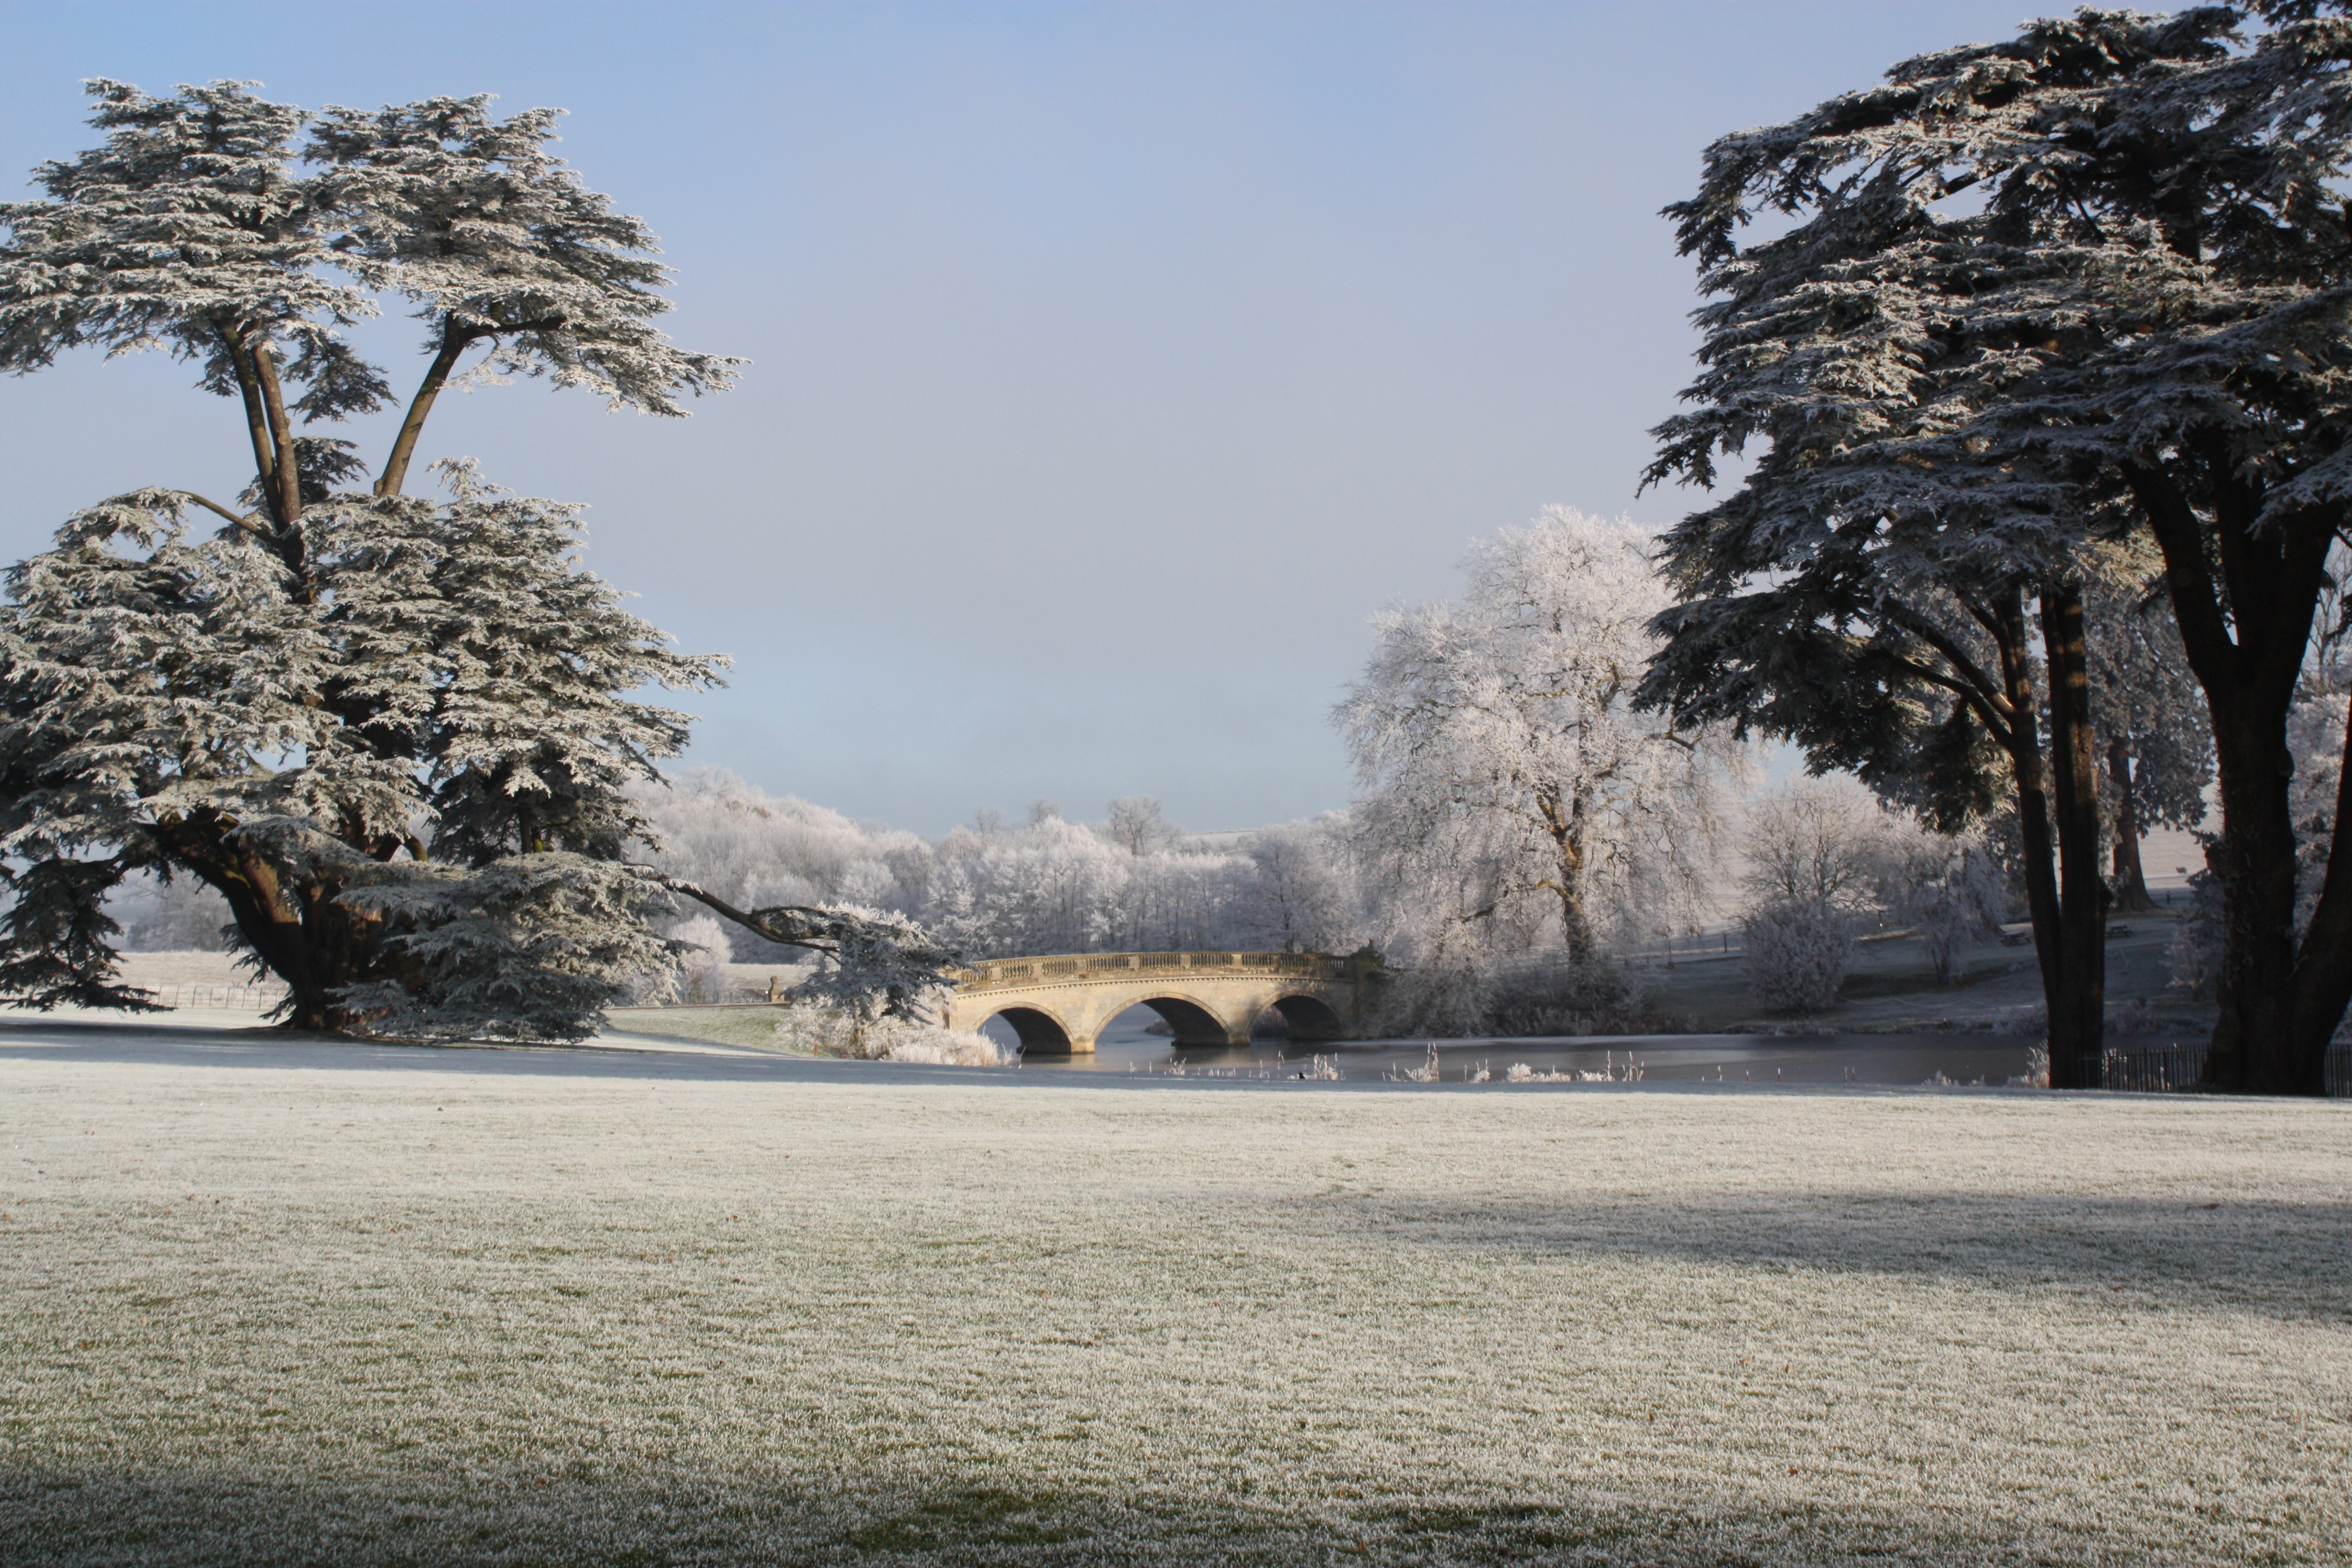 Enjoy Compton Verney between Christmas and New Year